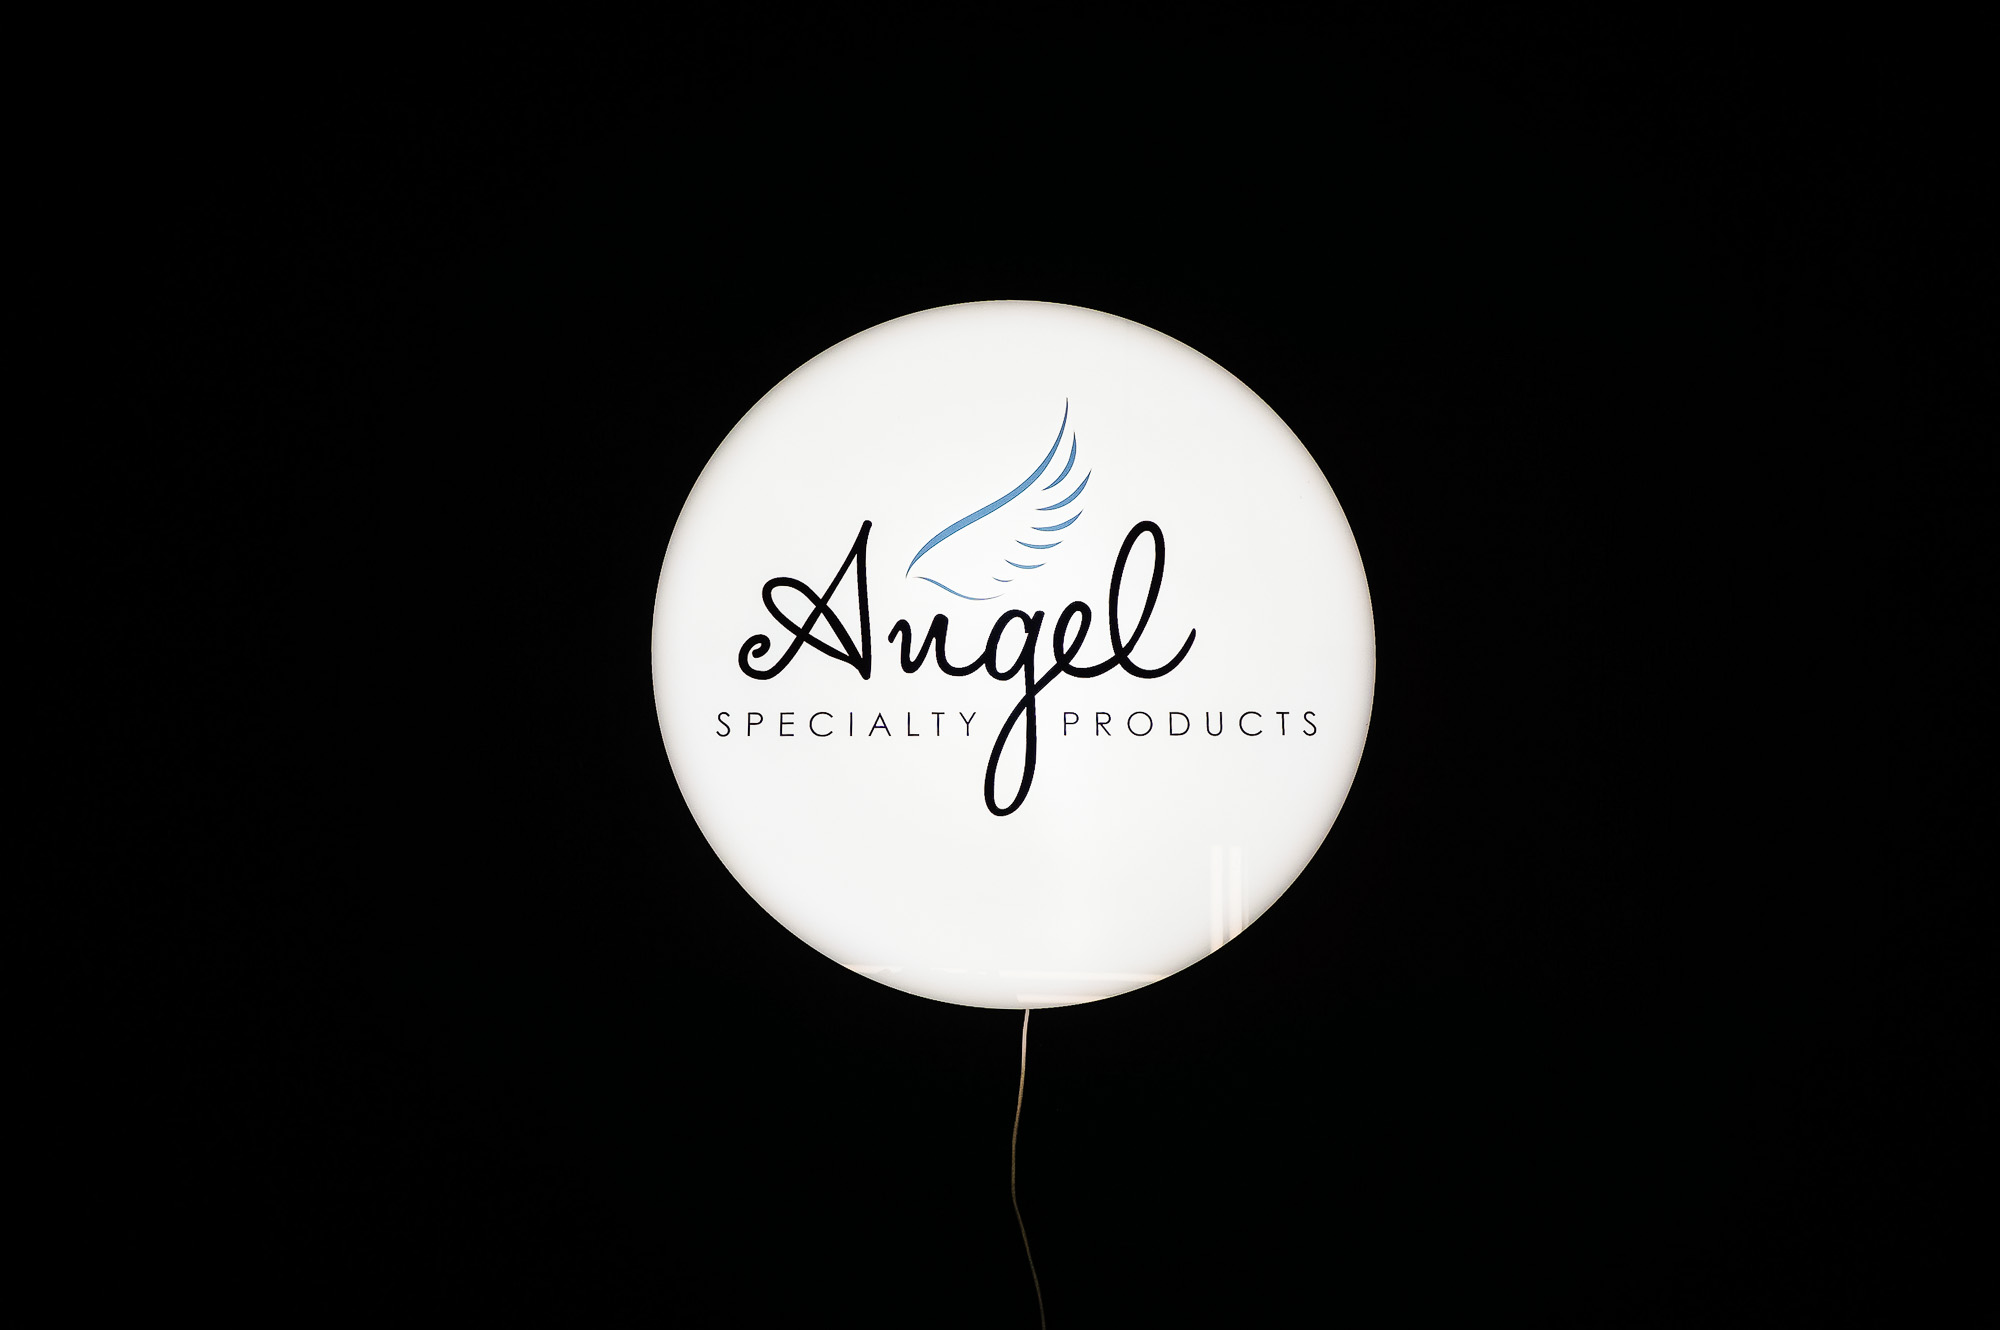 Illuminated, circular, face-lit sign for Angel Specialty Products